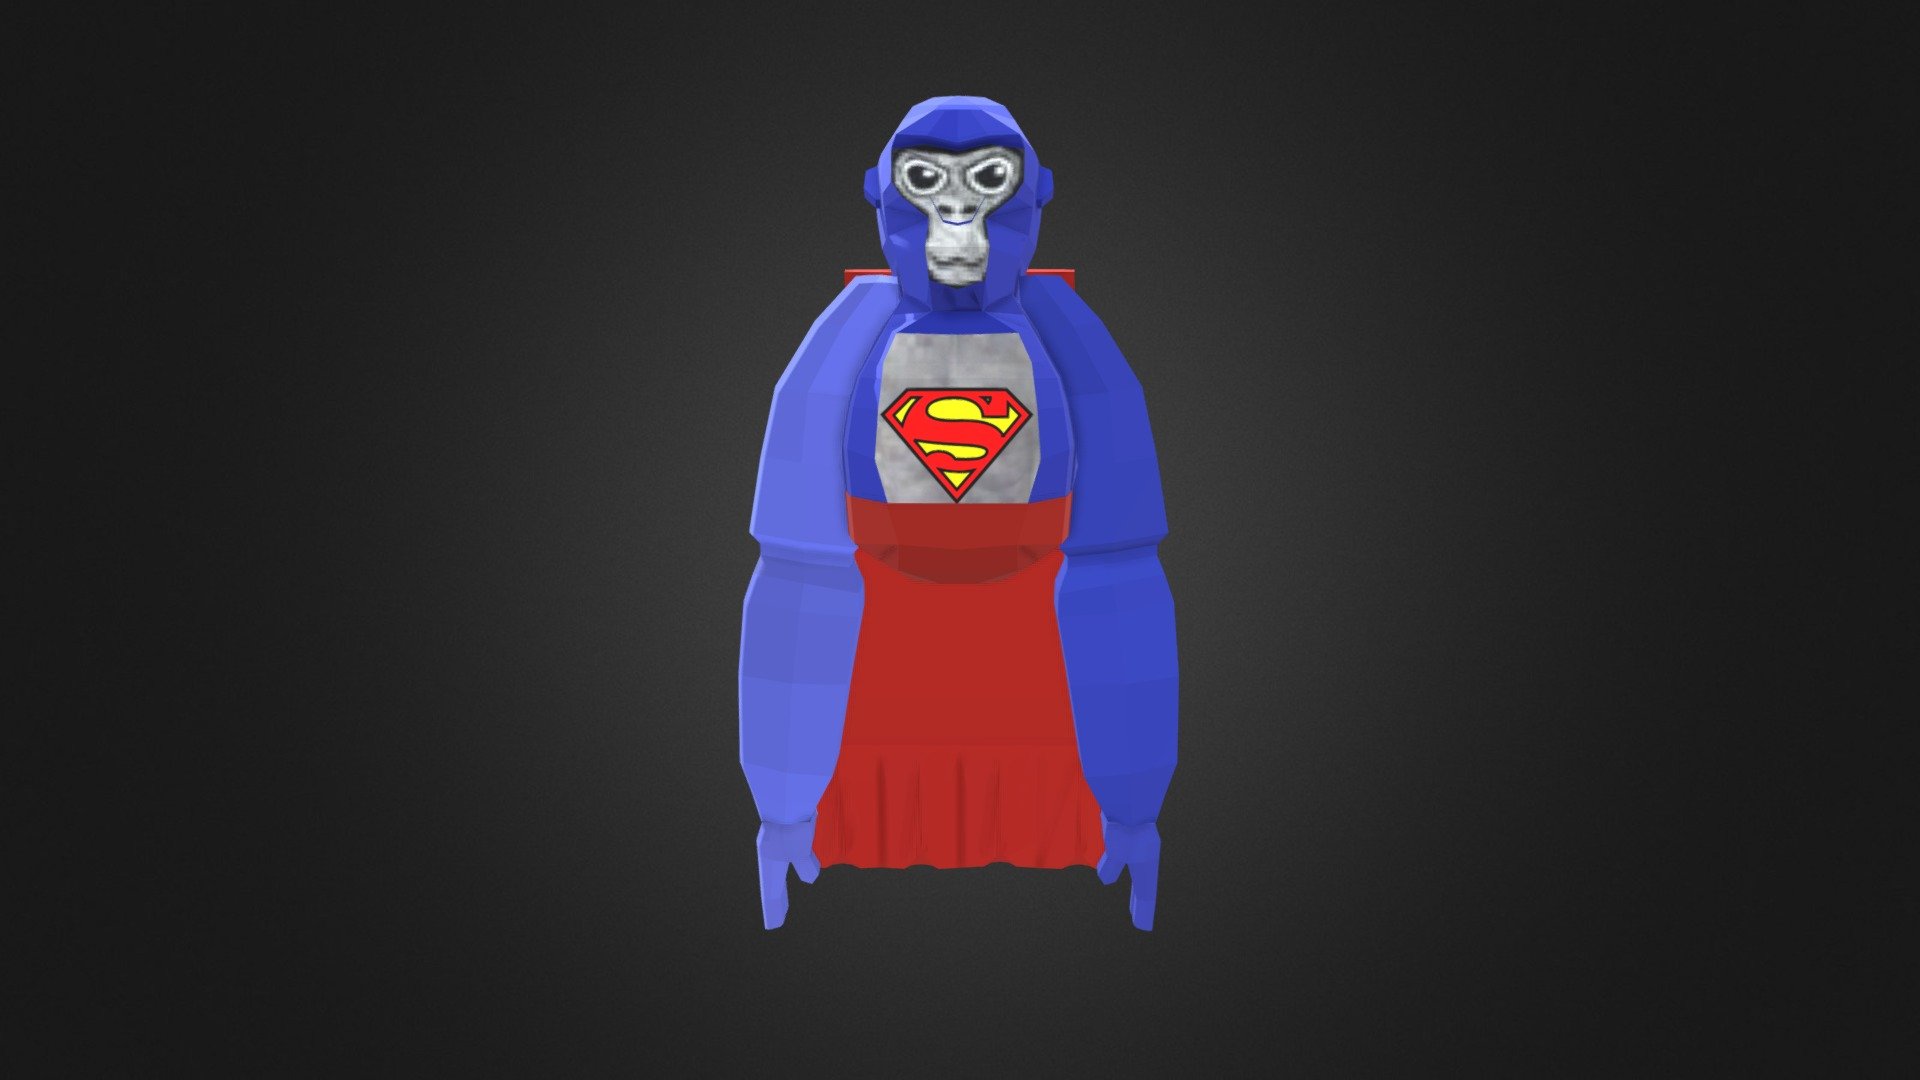 In this file, you will get a
blender Rigged file with an idle animation
FBX
and Textures

Downlaod it here for only 4$

https://www.buymeacoffee.com/nimagin/e/143940

**#superman #gorillatag #gorilla **


gorillatag #gorillatagvr #gorillatag3D #GorillaTag

GorillaTagGame

GorillaTagFun

GorillaTagging

GorillaTagChallenge

GorillaTagCommunity

TagYourGorilla

GorillaTaggers

GorillaTagAdventures

GorillaTaggingTime

SwingAndTag

GorillaTagged

GorillaTagMaster

GorillaTaggedAndItFeelsGood

GorillaTagTeam

GorillaTaggingParty

GorillaTagSquad

GorillaTaggingFun

GorillaTaggingMadness

GorillaTagAddict
Feel free to use these has - Gorilla TAG Superman | 4$ - 3D model by Nofil.Khan 3d model